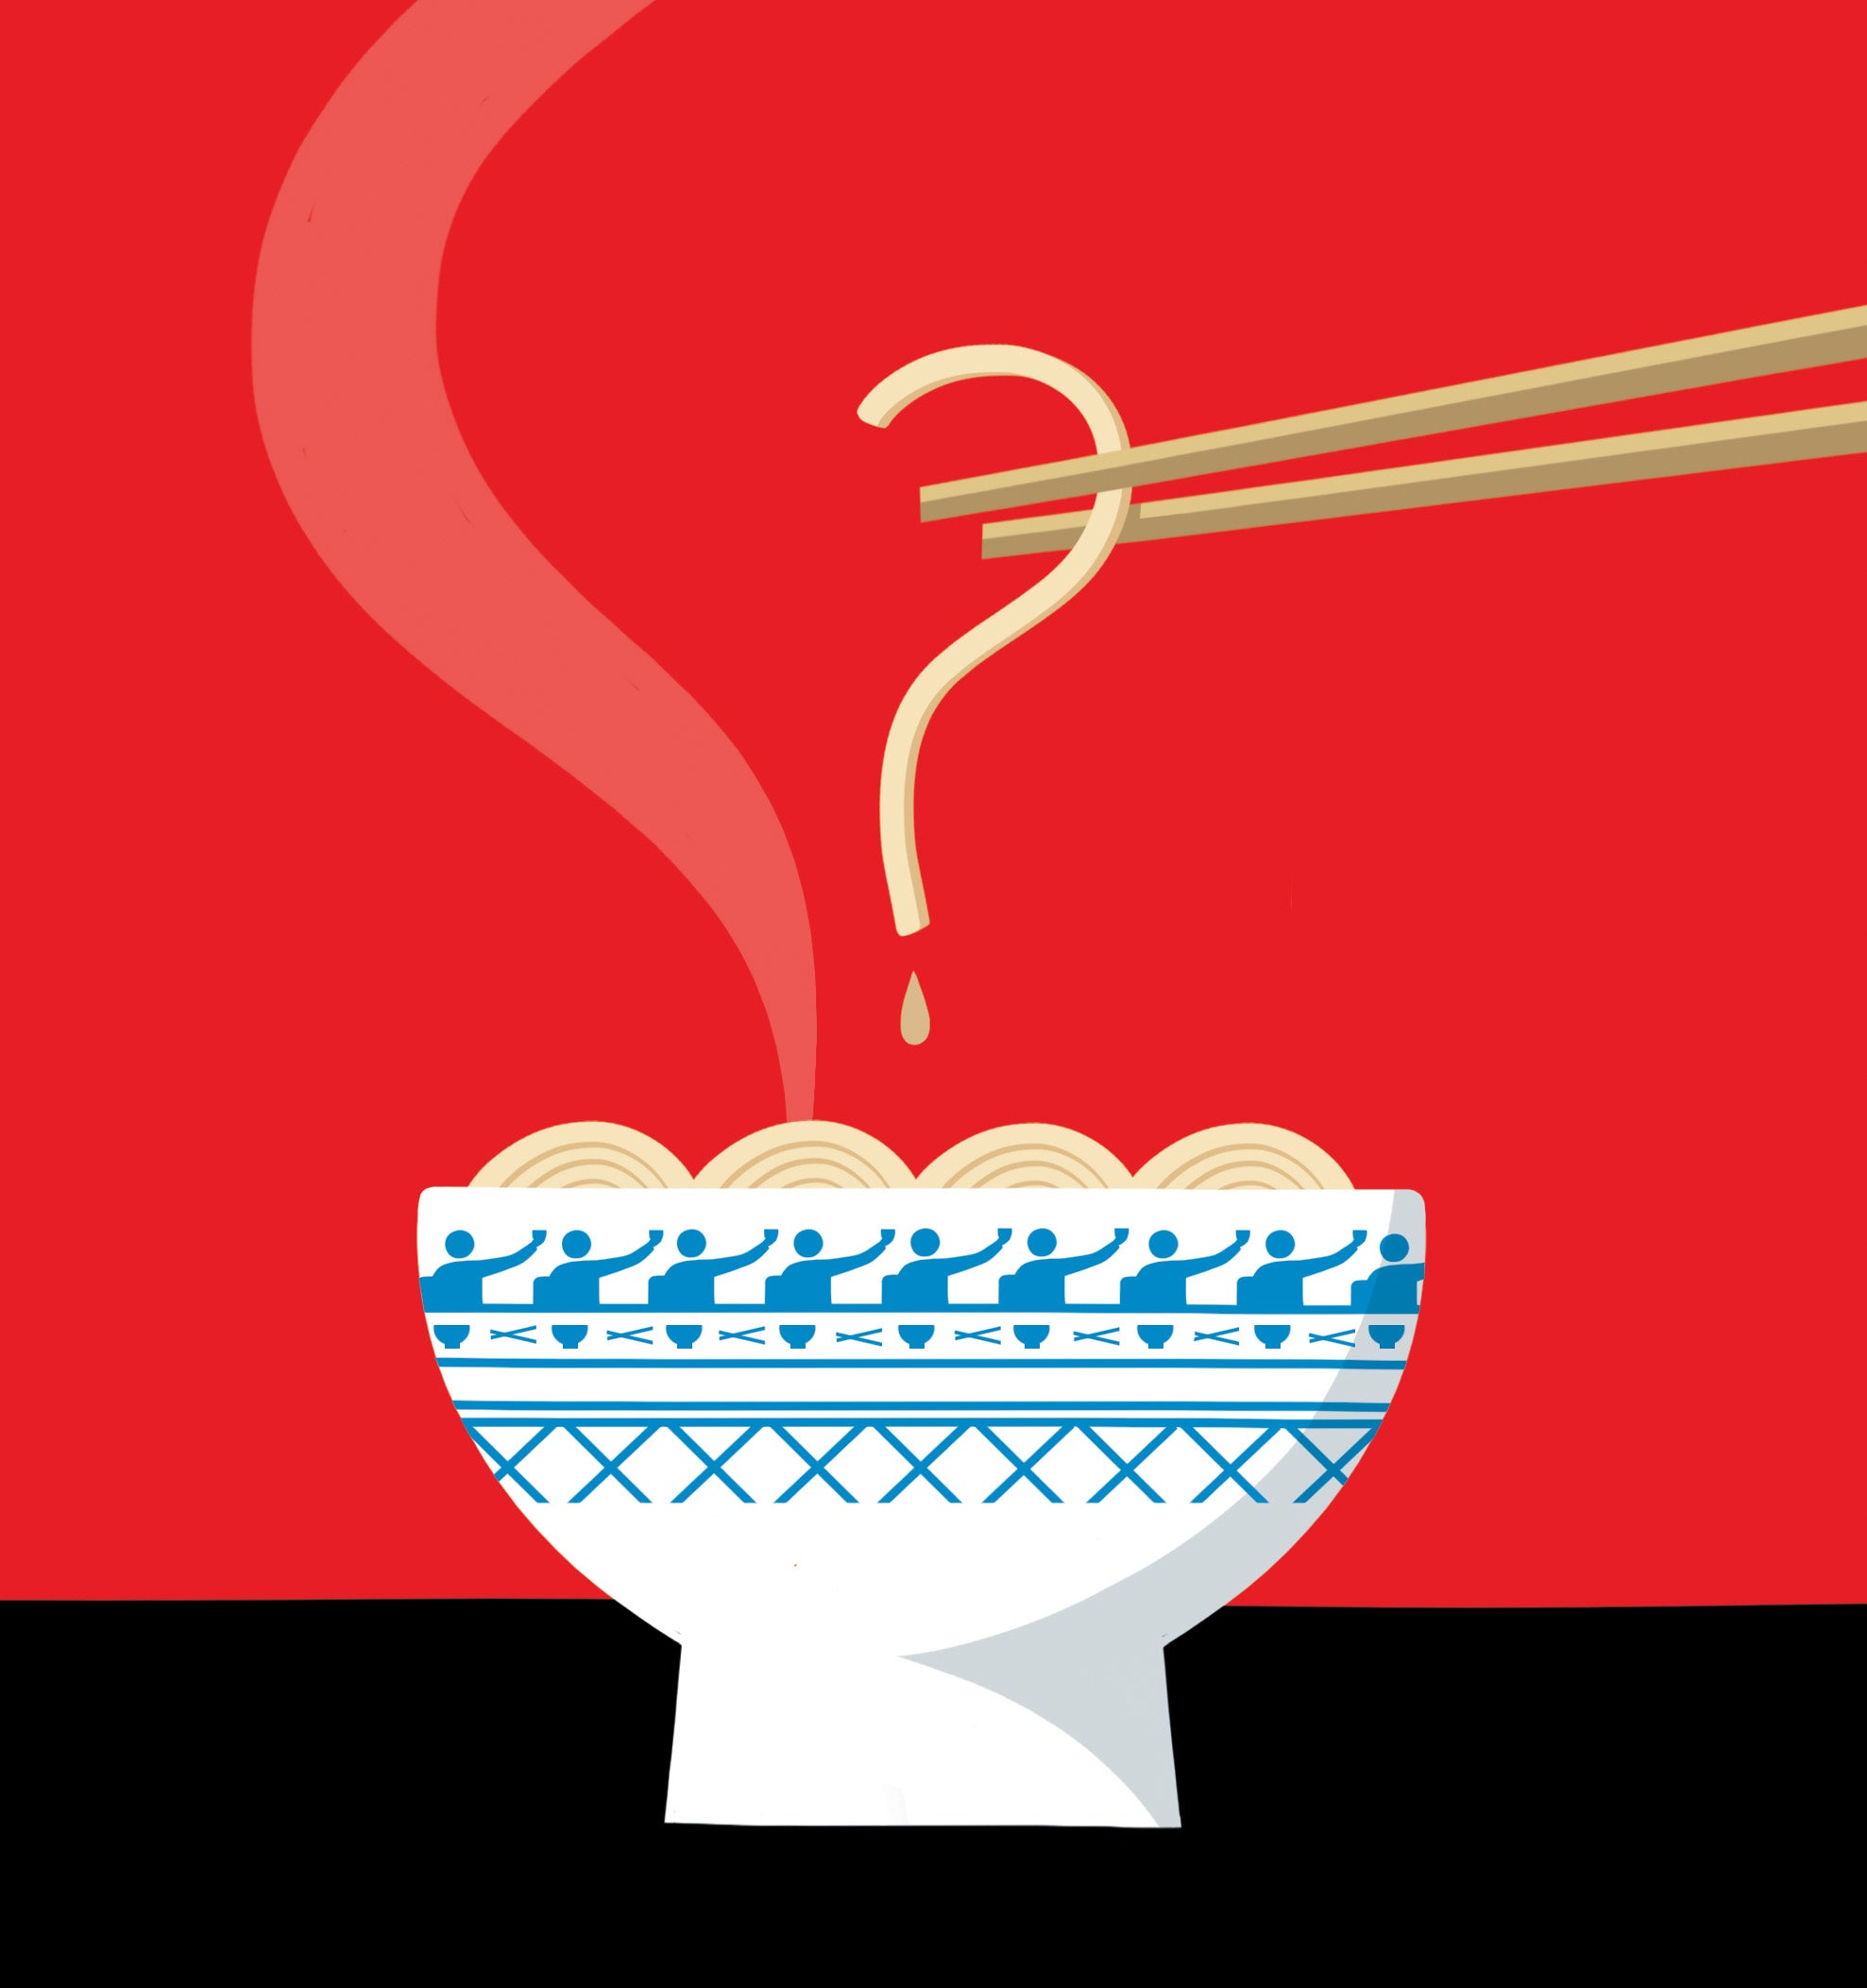 Noodle held by chopsticks and drop of broth form a question mark over a steaming bowl of noodles in a blue and white bowl.